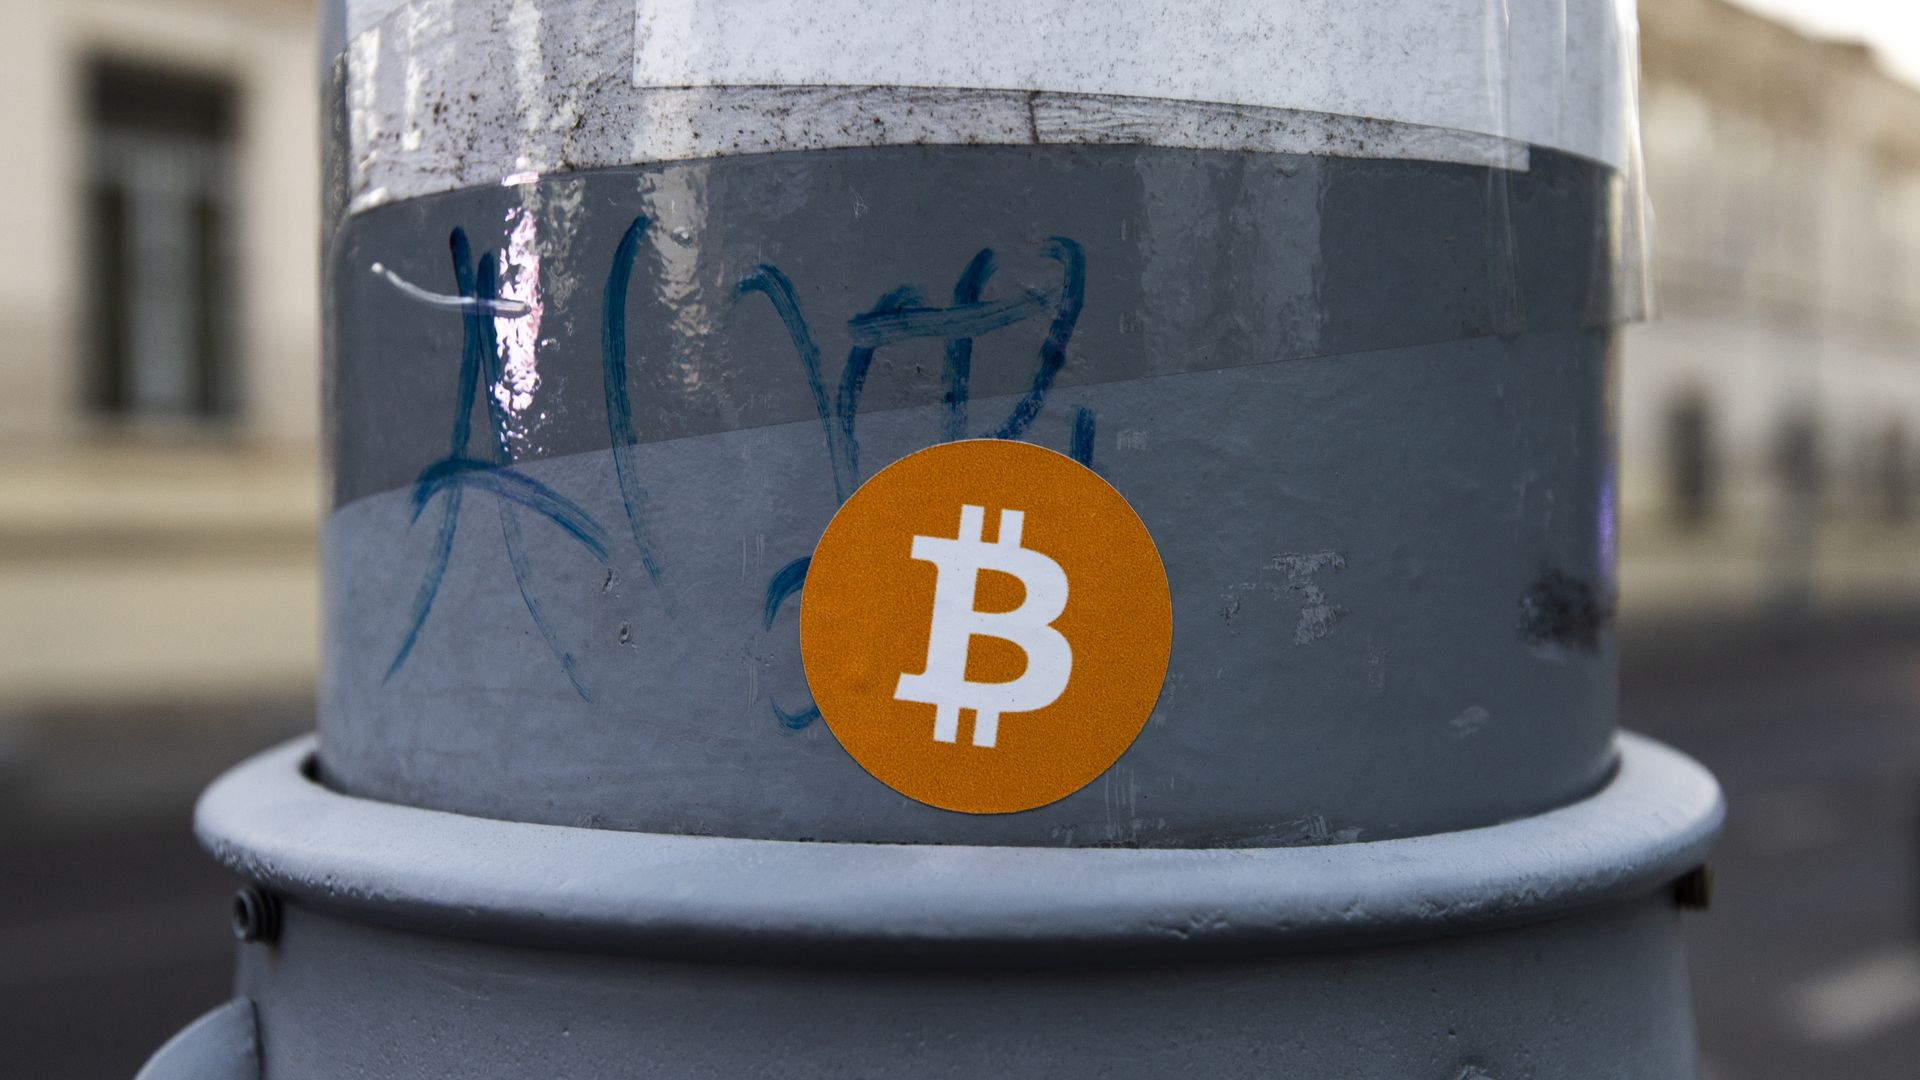 A sticker with the Bitcoin logo on it, on a lamp post.